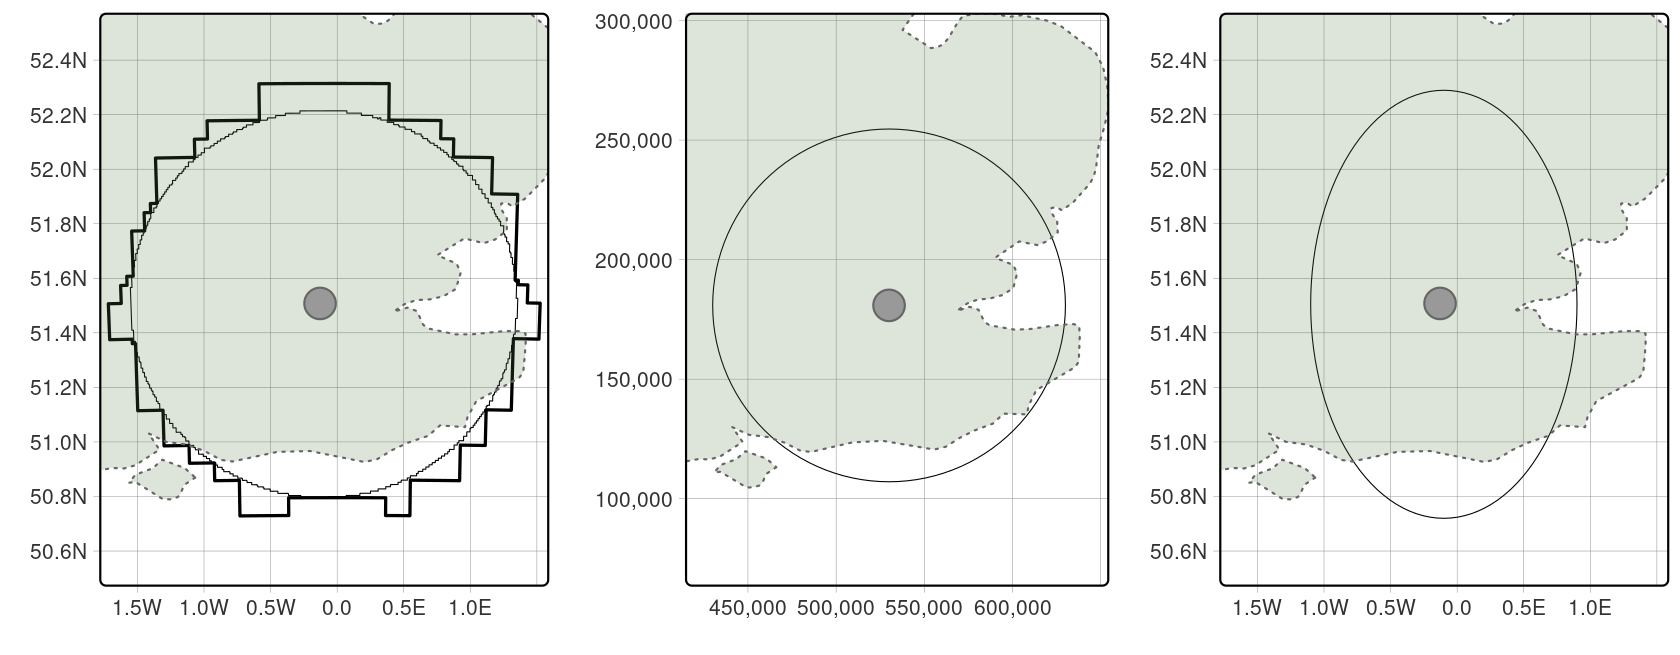 Buffers around London showing results created with the S2 spherical geometry engine on lon/lat data (left), projected data (middle) and lon/lat data without using spherical geometry (right). The left plot illustrates the result of buffering unprojected data with sf, which calls Google's S2 spherical geometry engine by default with max cells set to 1000 (thin line). The thick 'blocky' line illustrates the result of the same operation with max cells set to 100.